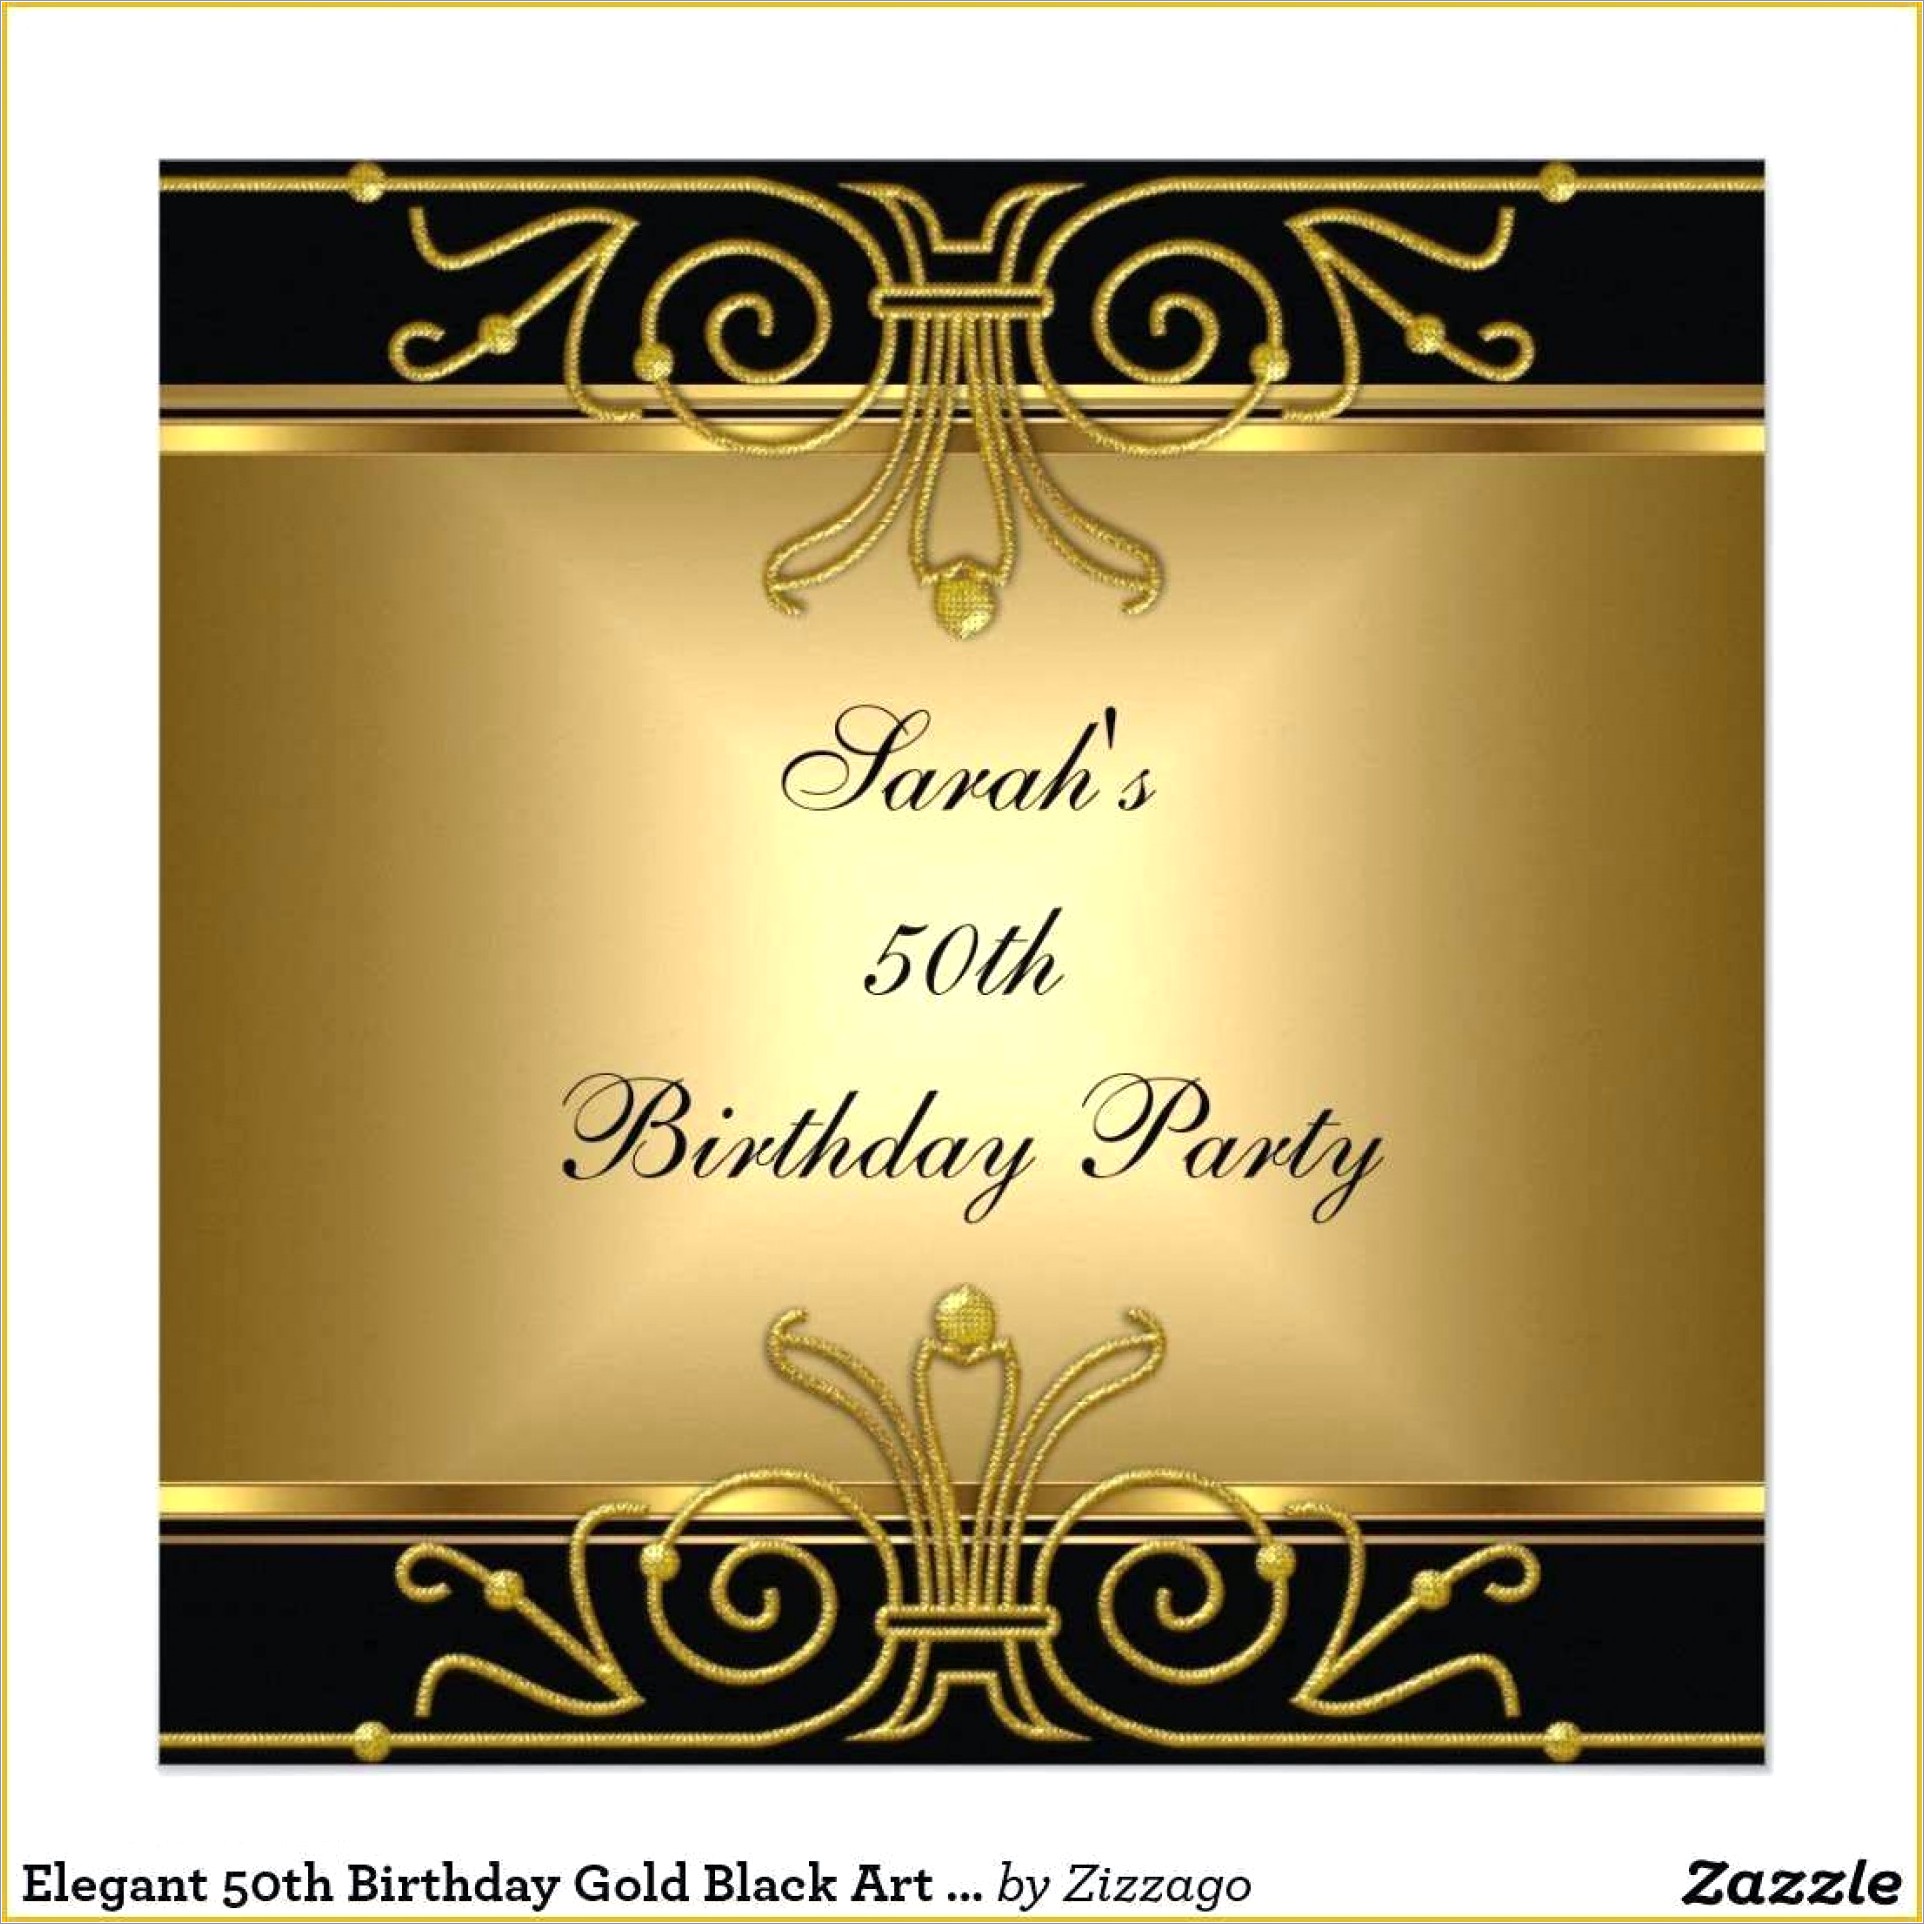 Black And Gold Invitation Template Free